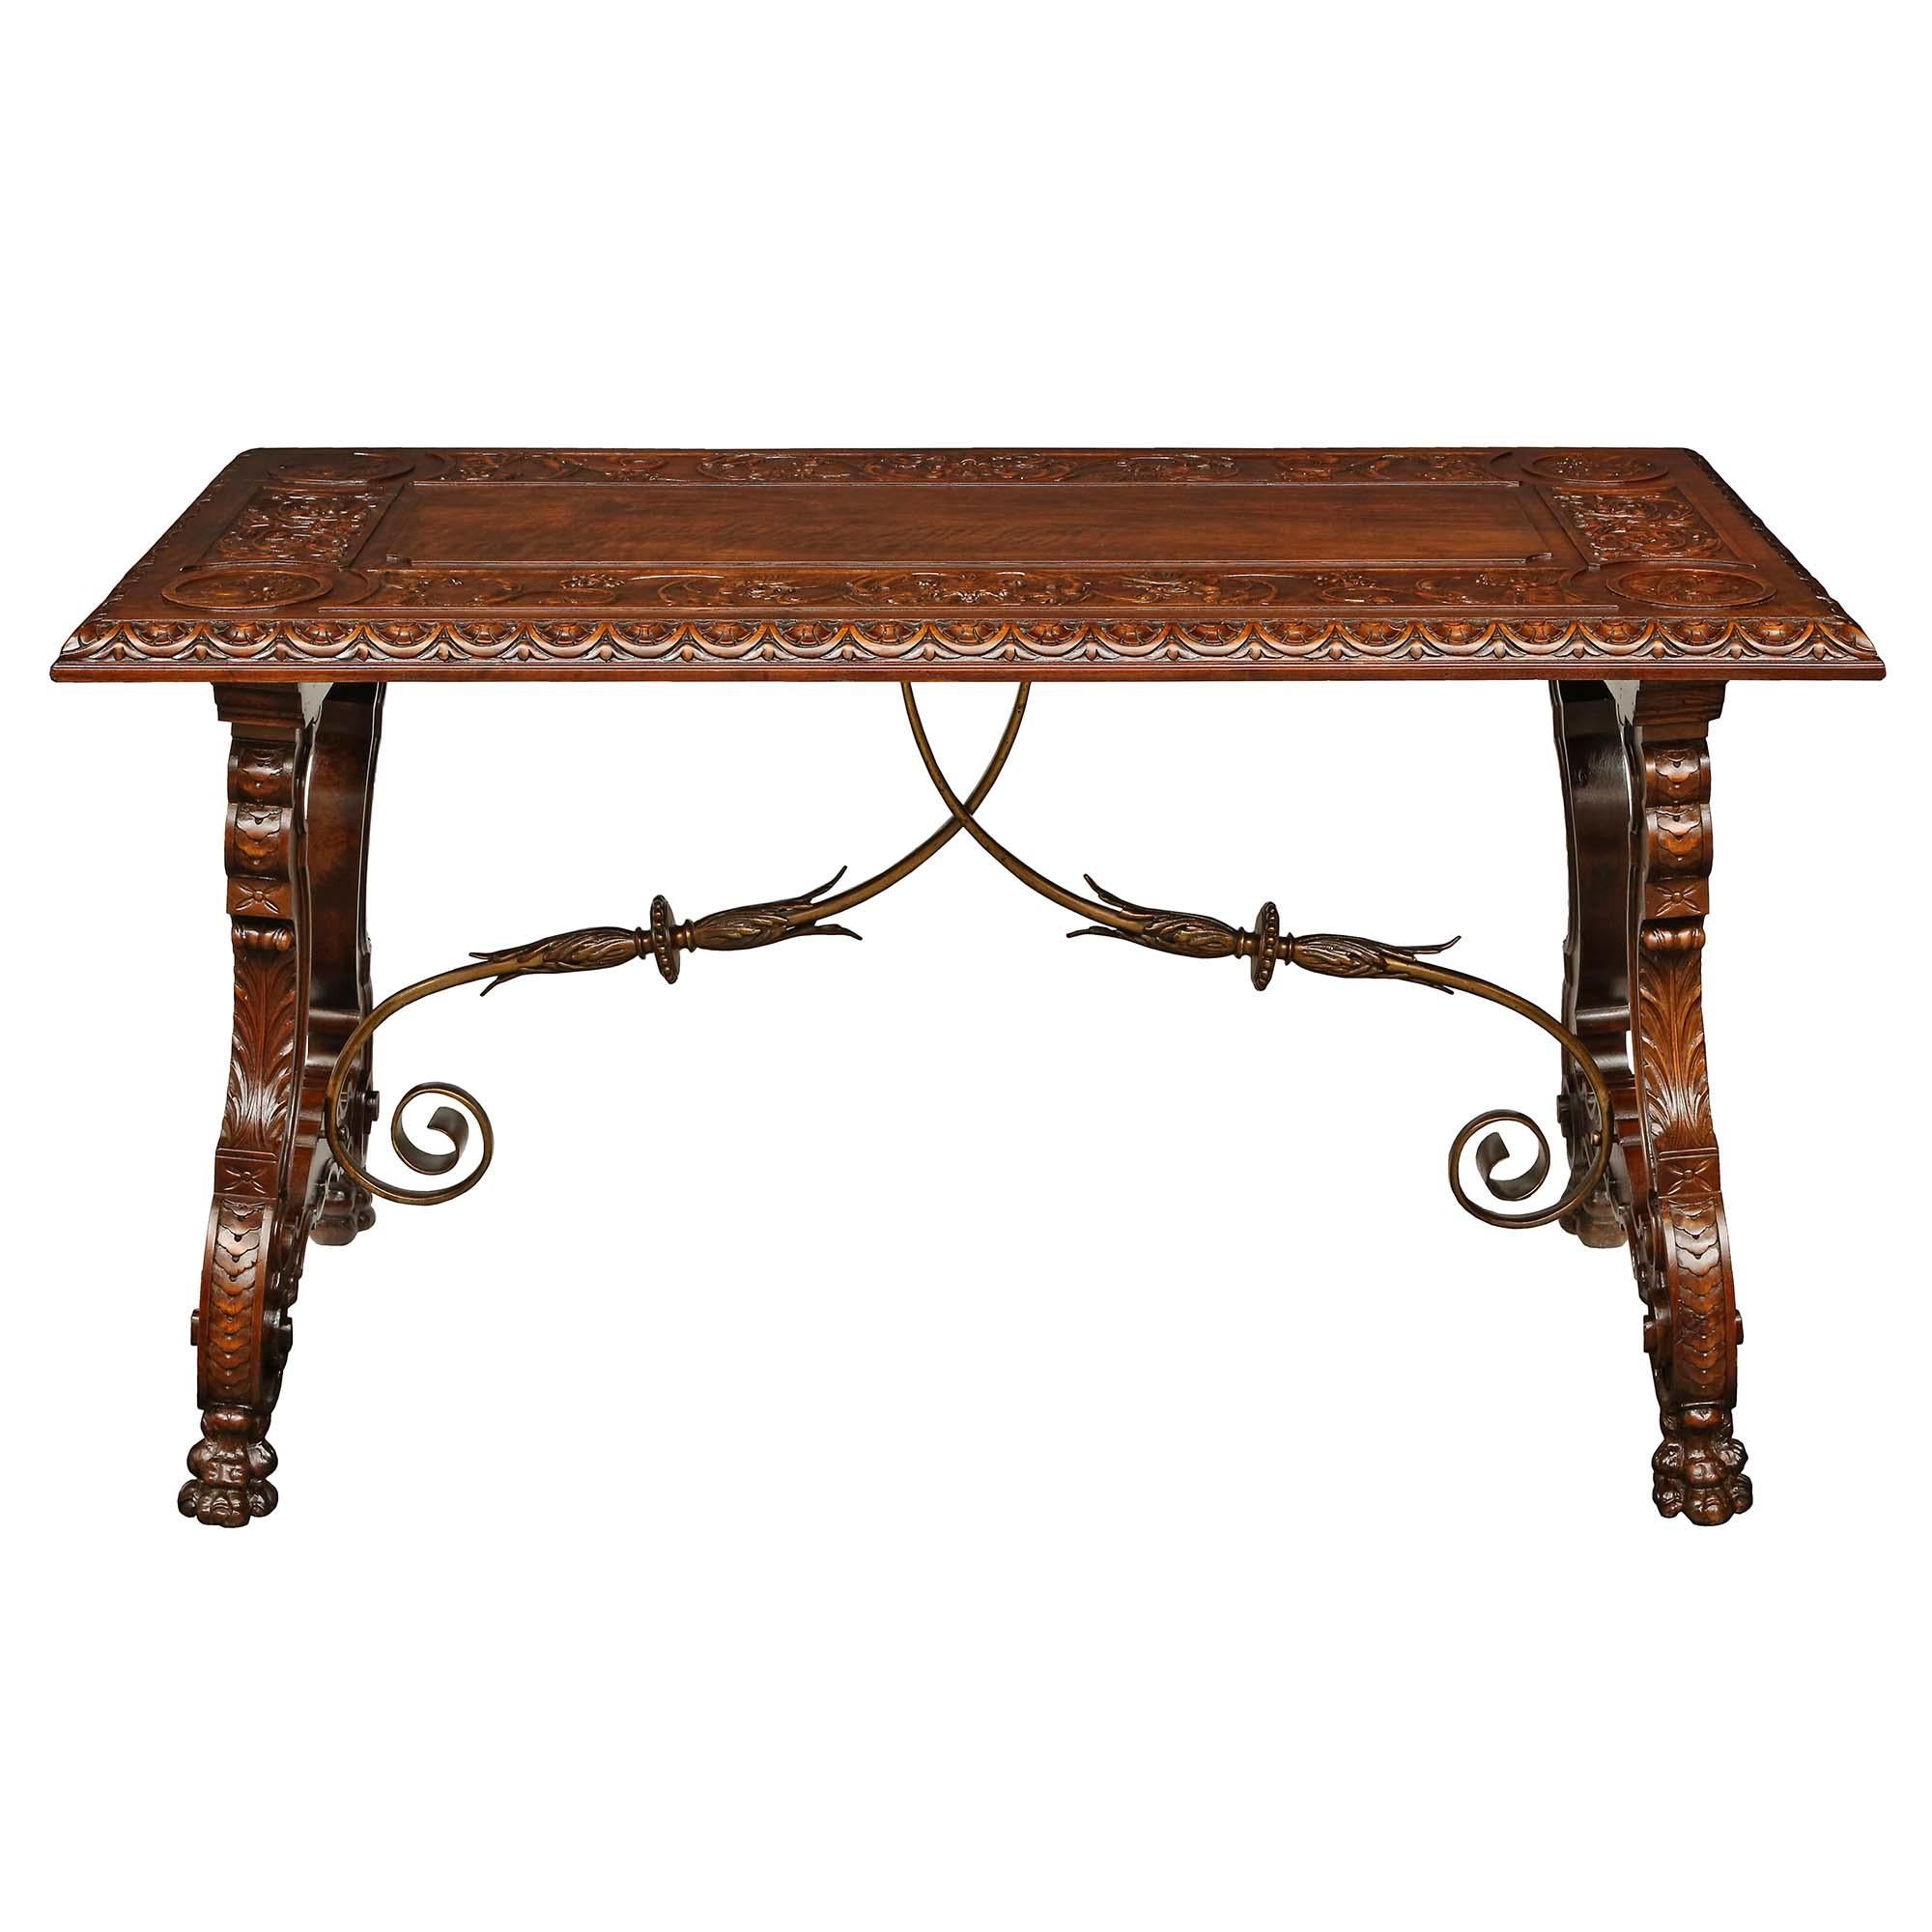 A handsome Spanish 19th century Renaissance st. walnut trestle table. The table is raised by four handsome richly carved paw feet below the impressive scrolling supports with finely carved floral patterns throughout. The striking iron scrolled